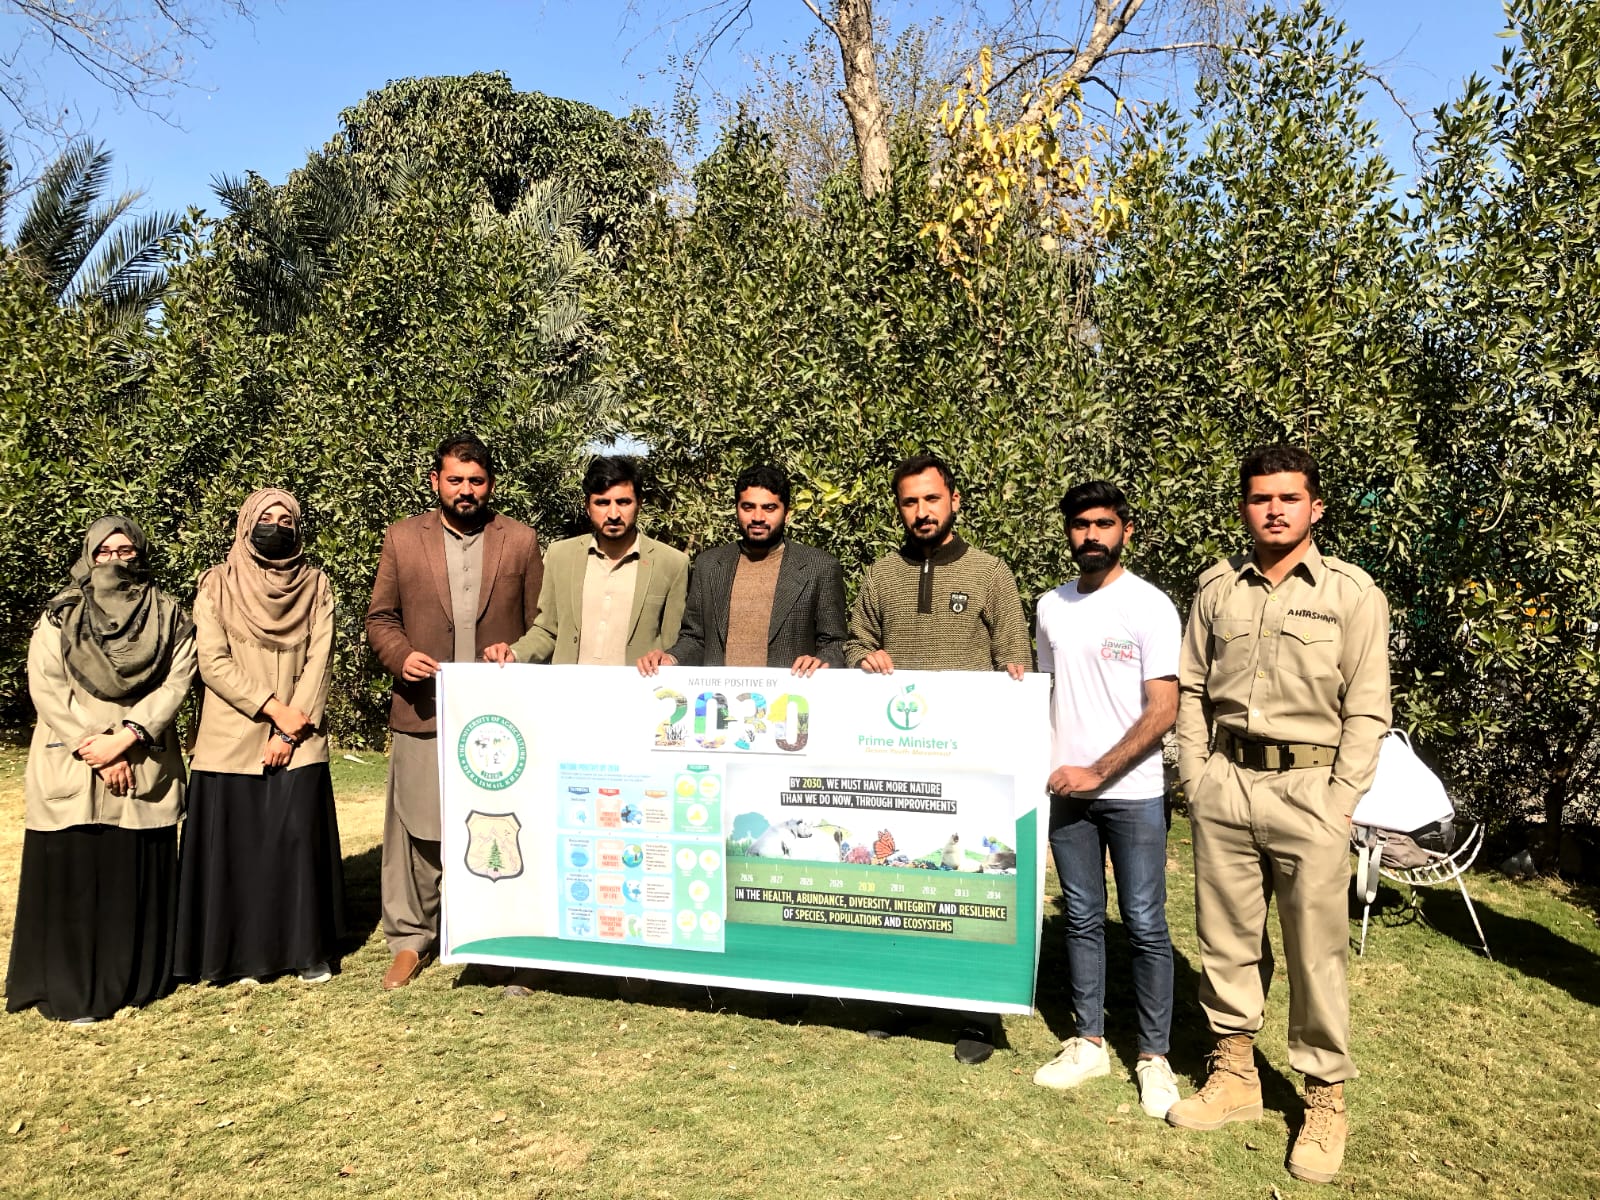 The University of Agriculture Dera Ismail Khan, the GYM club members and students of Agriculture and Forestry carried out a cleanliness drive and plantation of nurseries at the university farm and orchard to make it a friendly place for the students and awareness for community. 